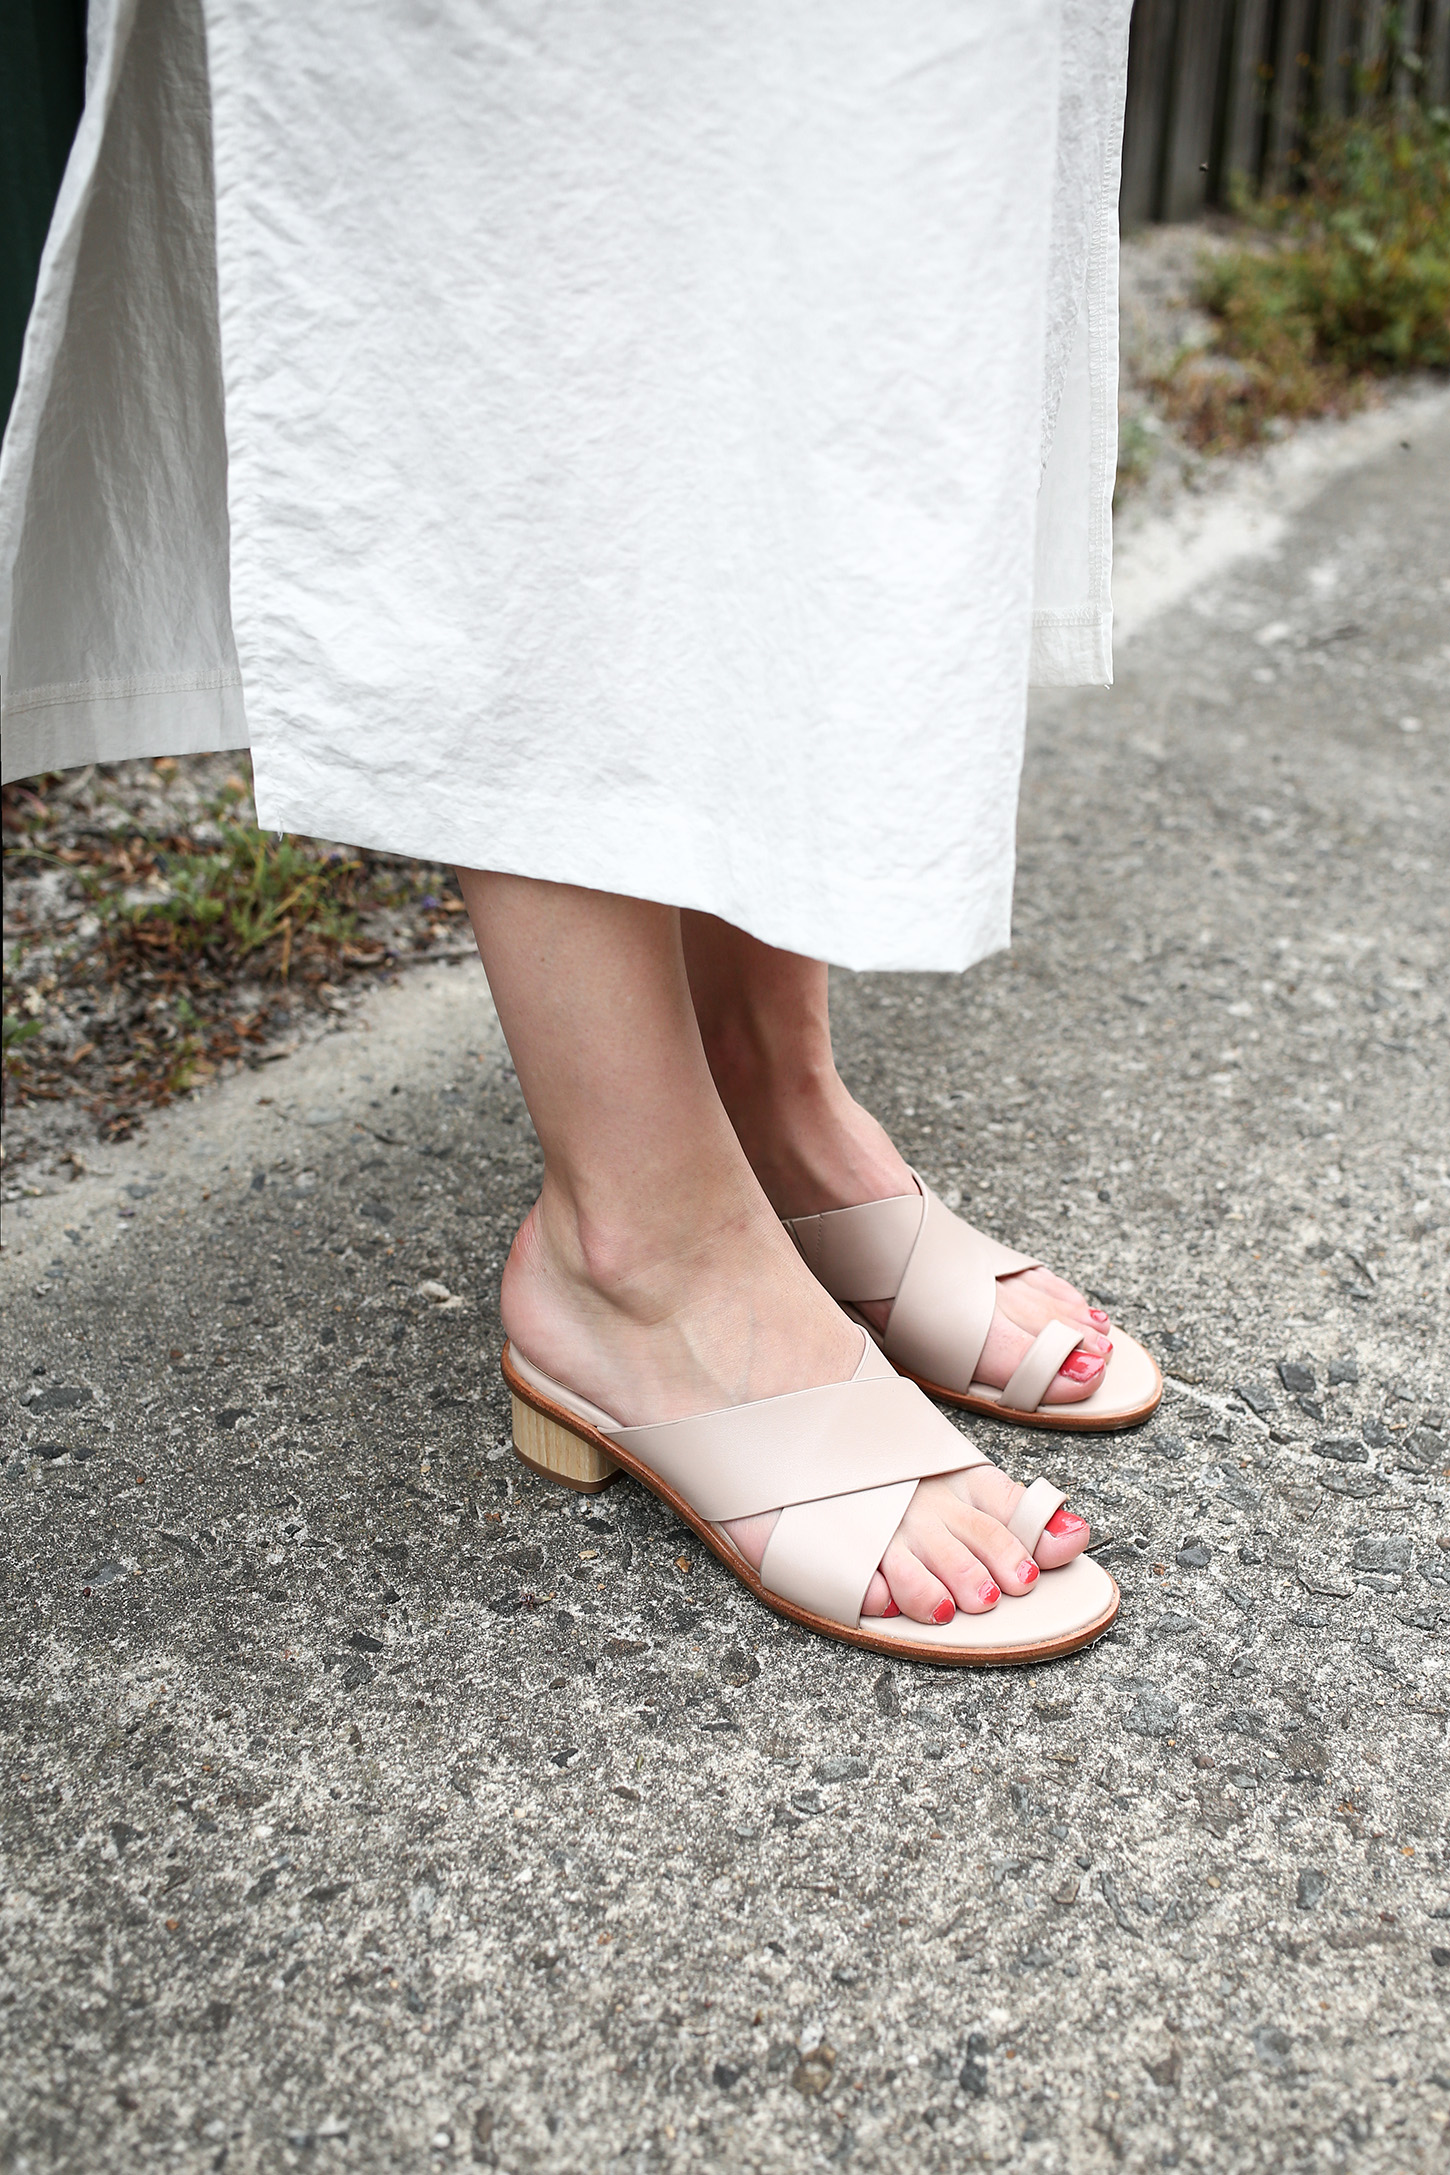 Wearing lately: White dress and nude mules | Mademoiselle | A ...